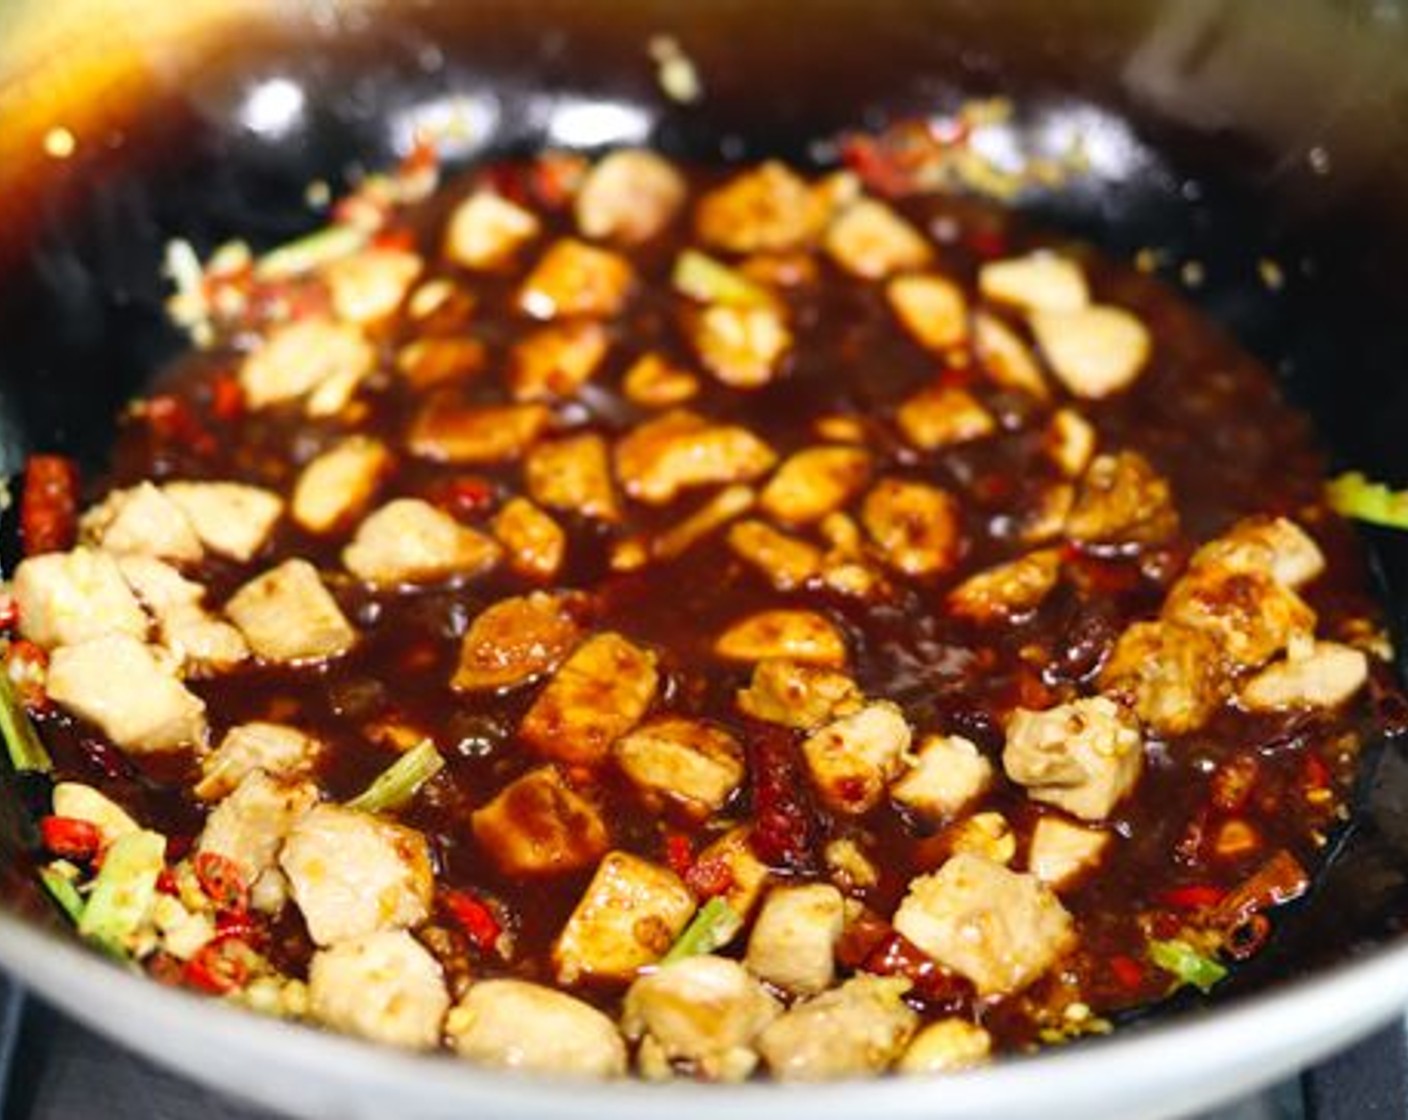 step 13 Give the bowl of sauce a stir to loosen up the corn starch with a spoon, then pour the sauce in a circular motion to cover as many of the chicken pieces as possible. Stir-fry and toss continuously to coat all the chicken pieces with the sauce.